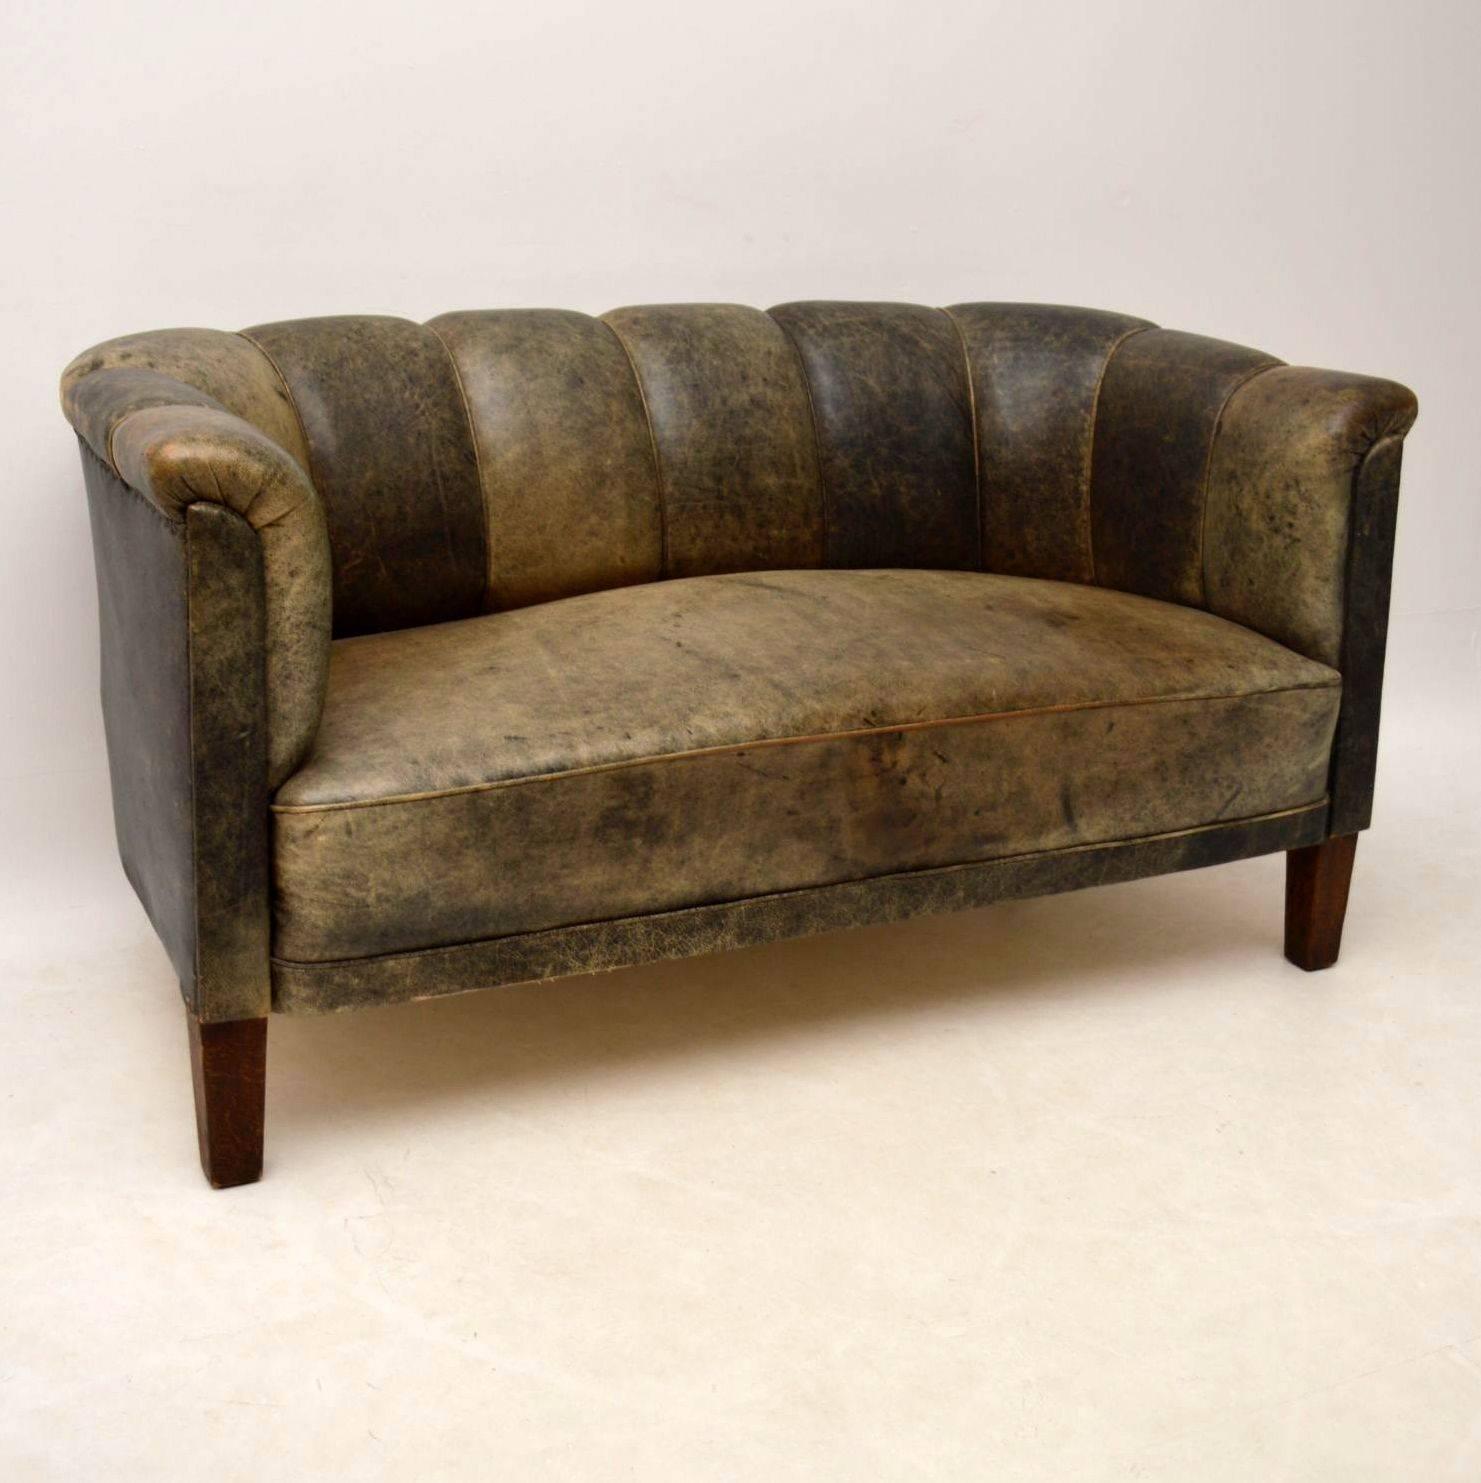 This Swedish antique fluted back leather sofa has the most amazing original colored leather. It's naturally distressed and consequently the leather has many different shades of green and brown showing. Please enlarge all the images and have a look